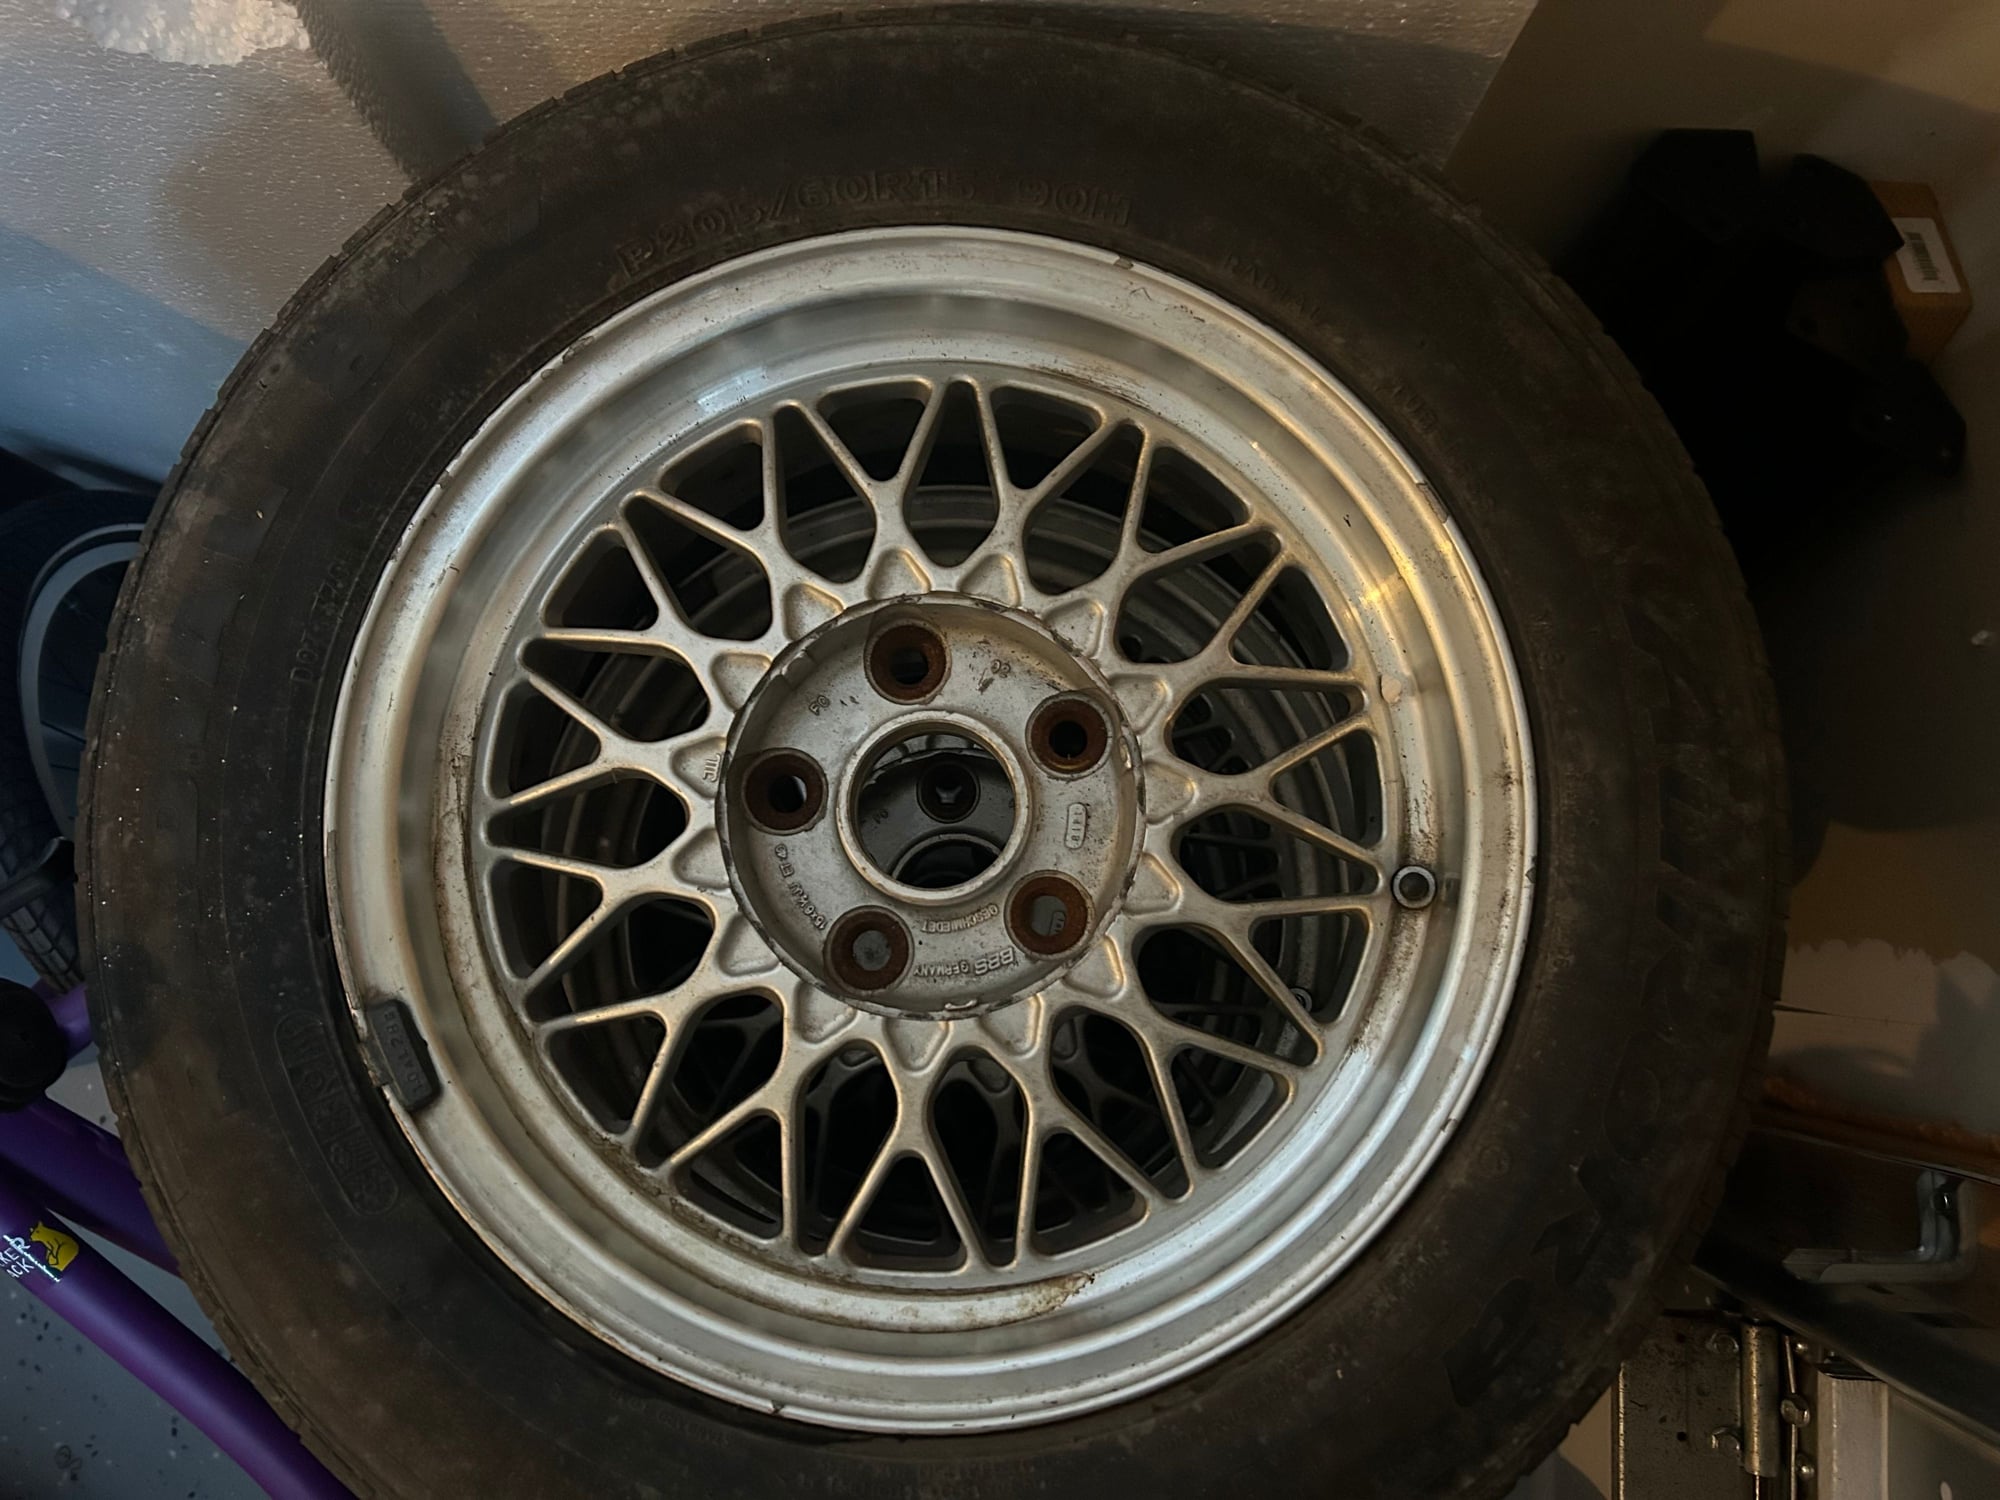 Wheels and Tires/Axles - FC RX-7 BBS 5x114.3 Wheels w/ Center Caps 15x6.5 ET40 - Used - -1 to 2025  All Models - Fulton, MD 20759, United States